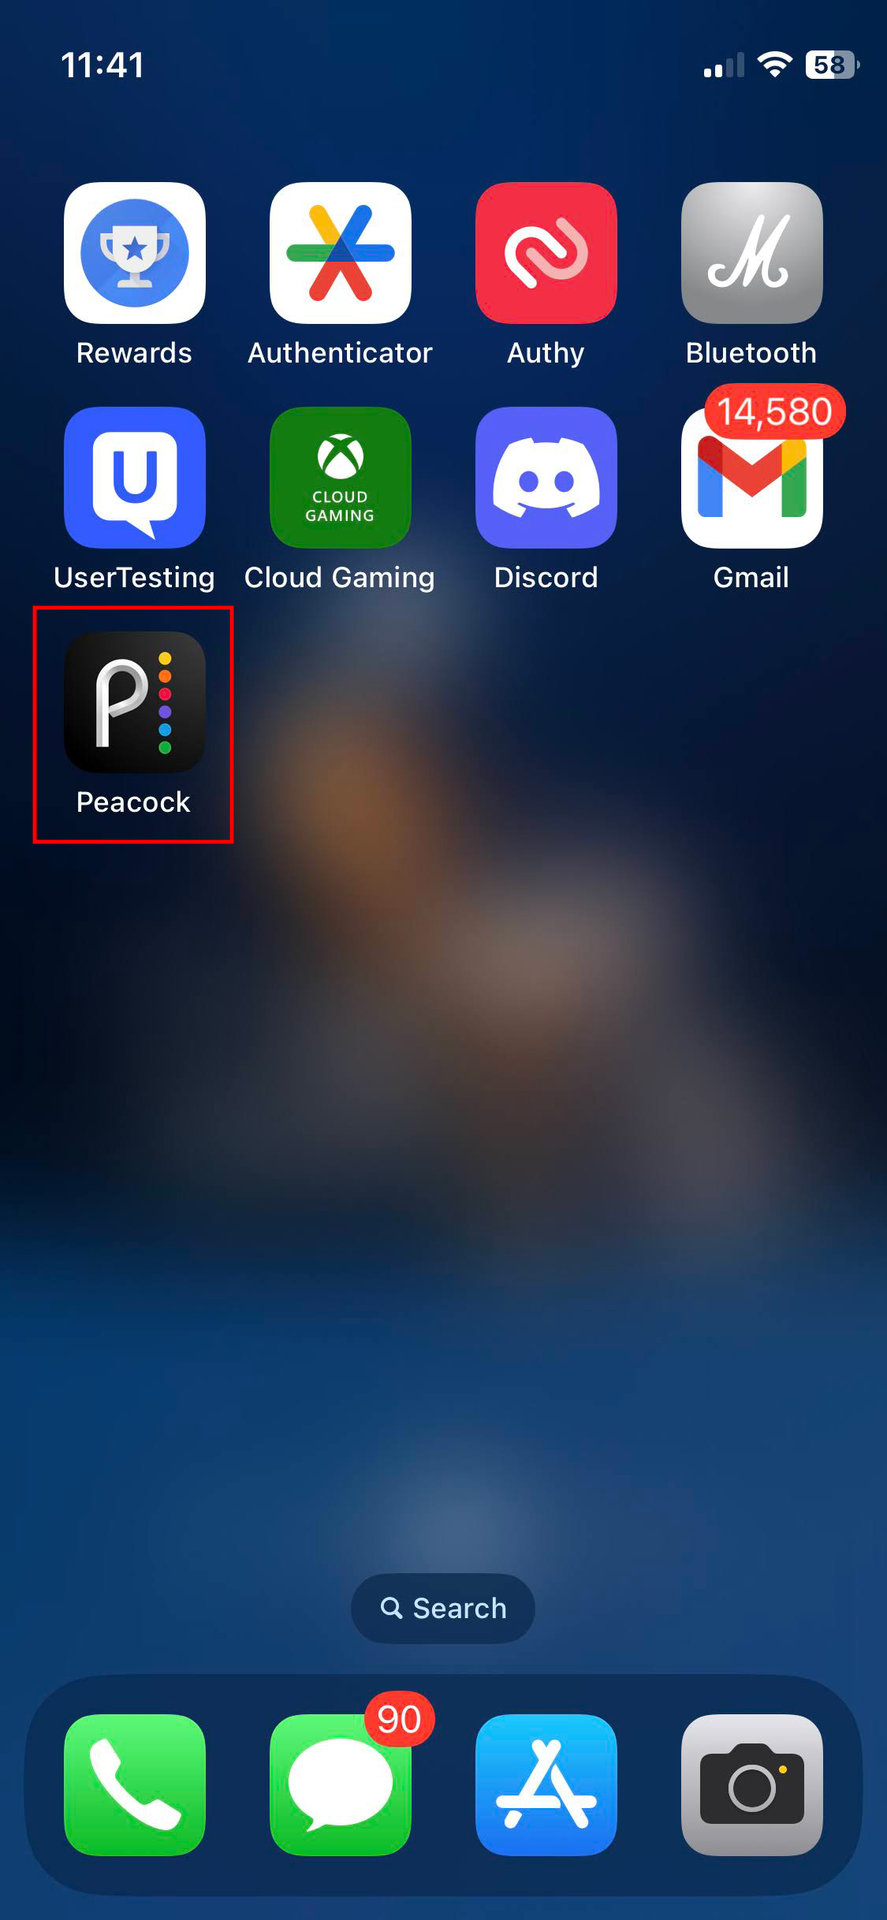 How to uninstall Peacock on iPhone 1